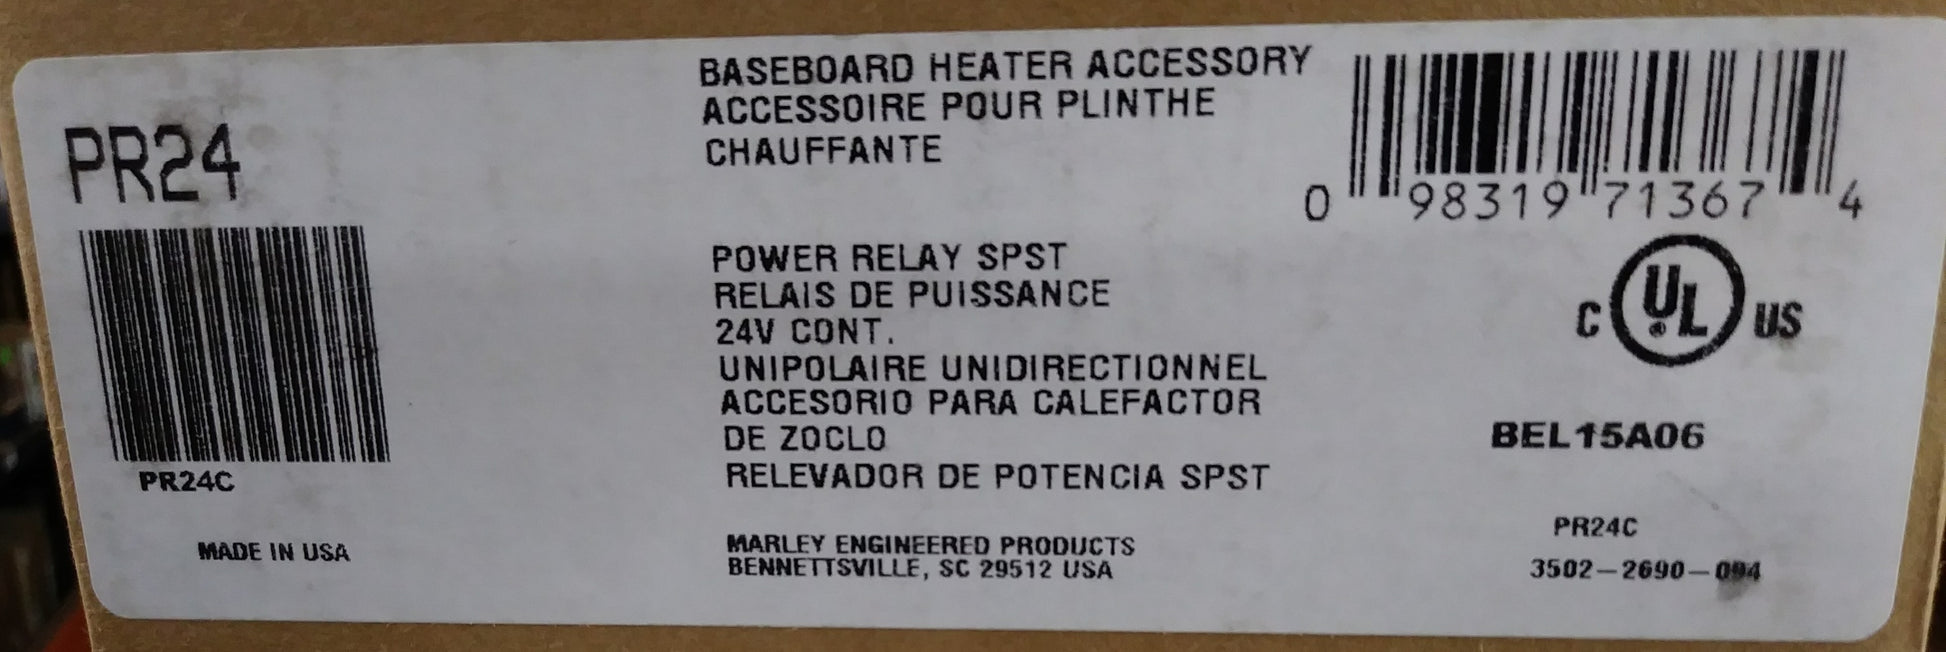 24 V SPST POWER RELAY FOR 1800,1900,2500,2600,C1800 & C2500 SERIES BASEBOARD HEATERS